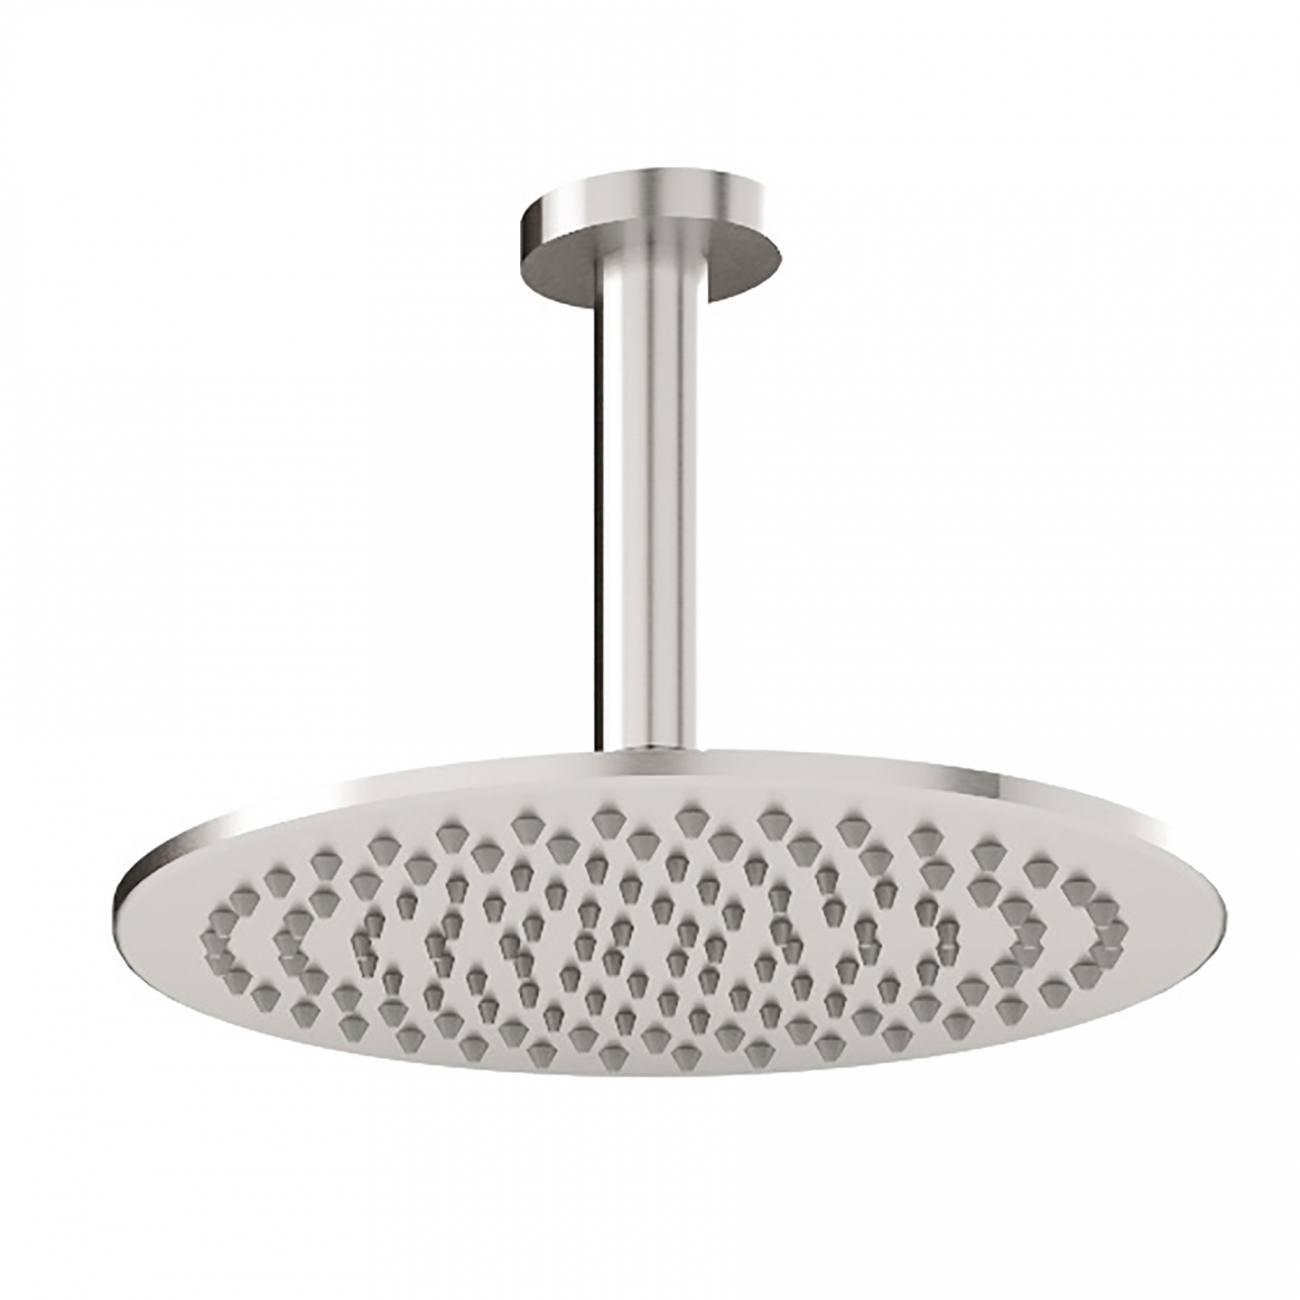 Treemme 22mm ceiling-mounted showerhead